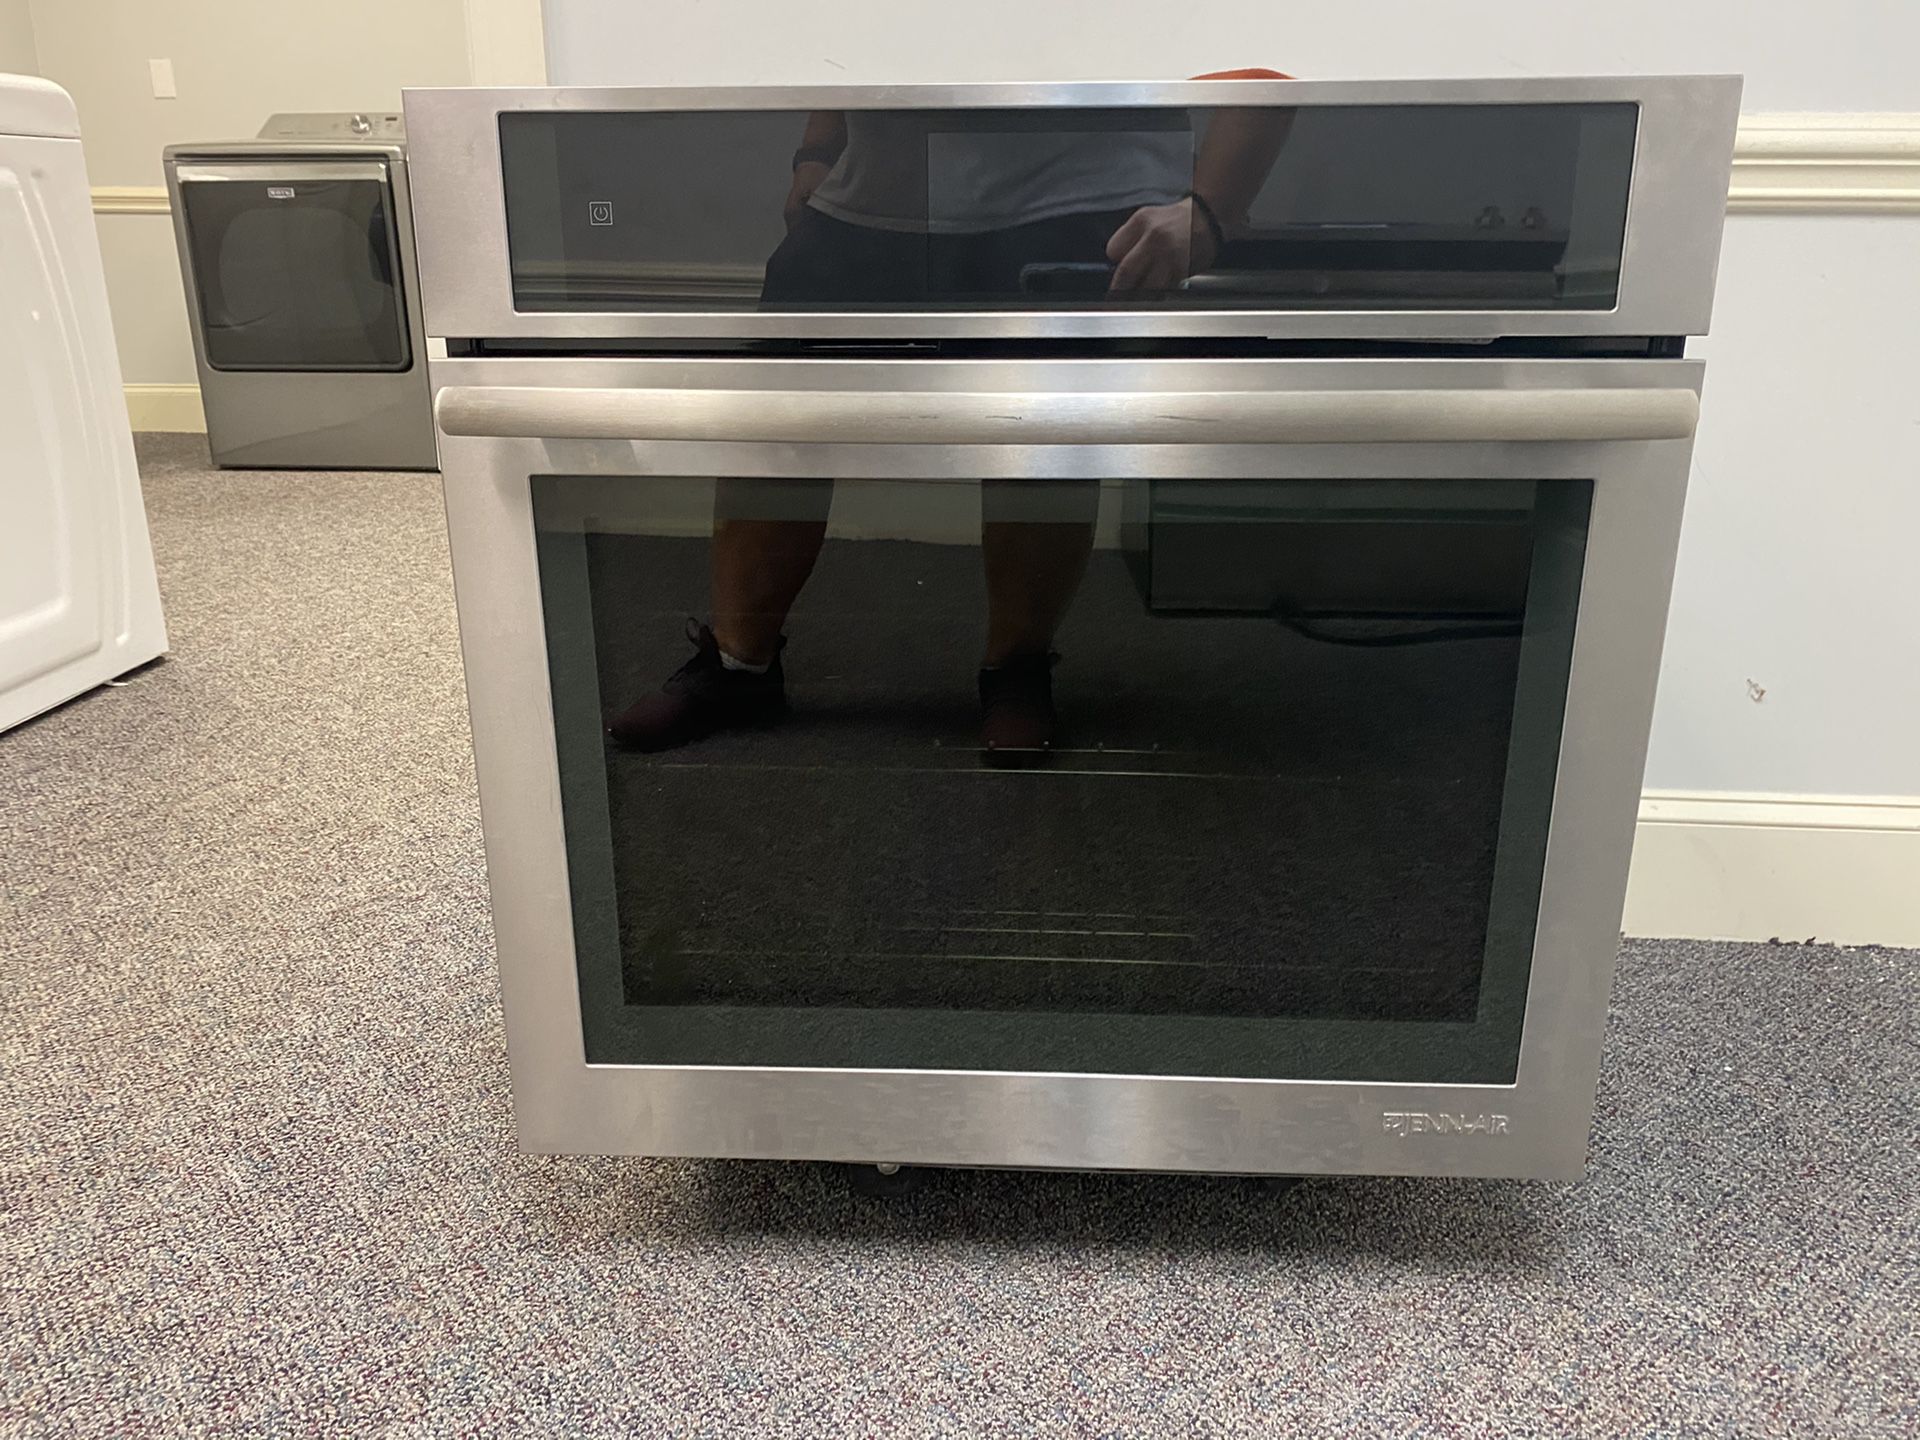 BRAND NEW JENN AIR STAINLESS STEEL CONVECTION WALL UNIT- WARRANTY